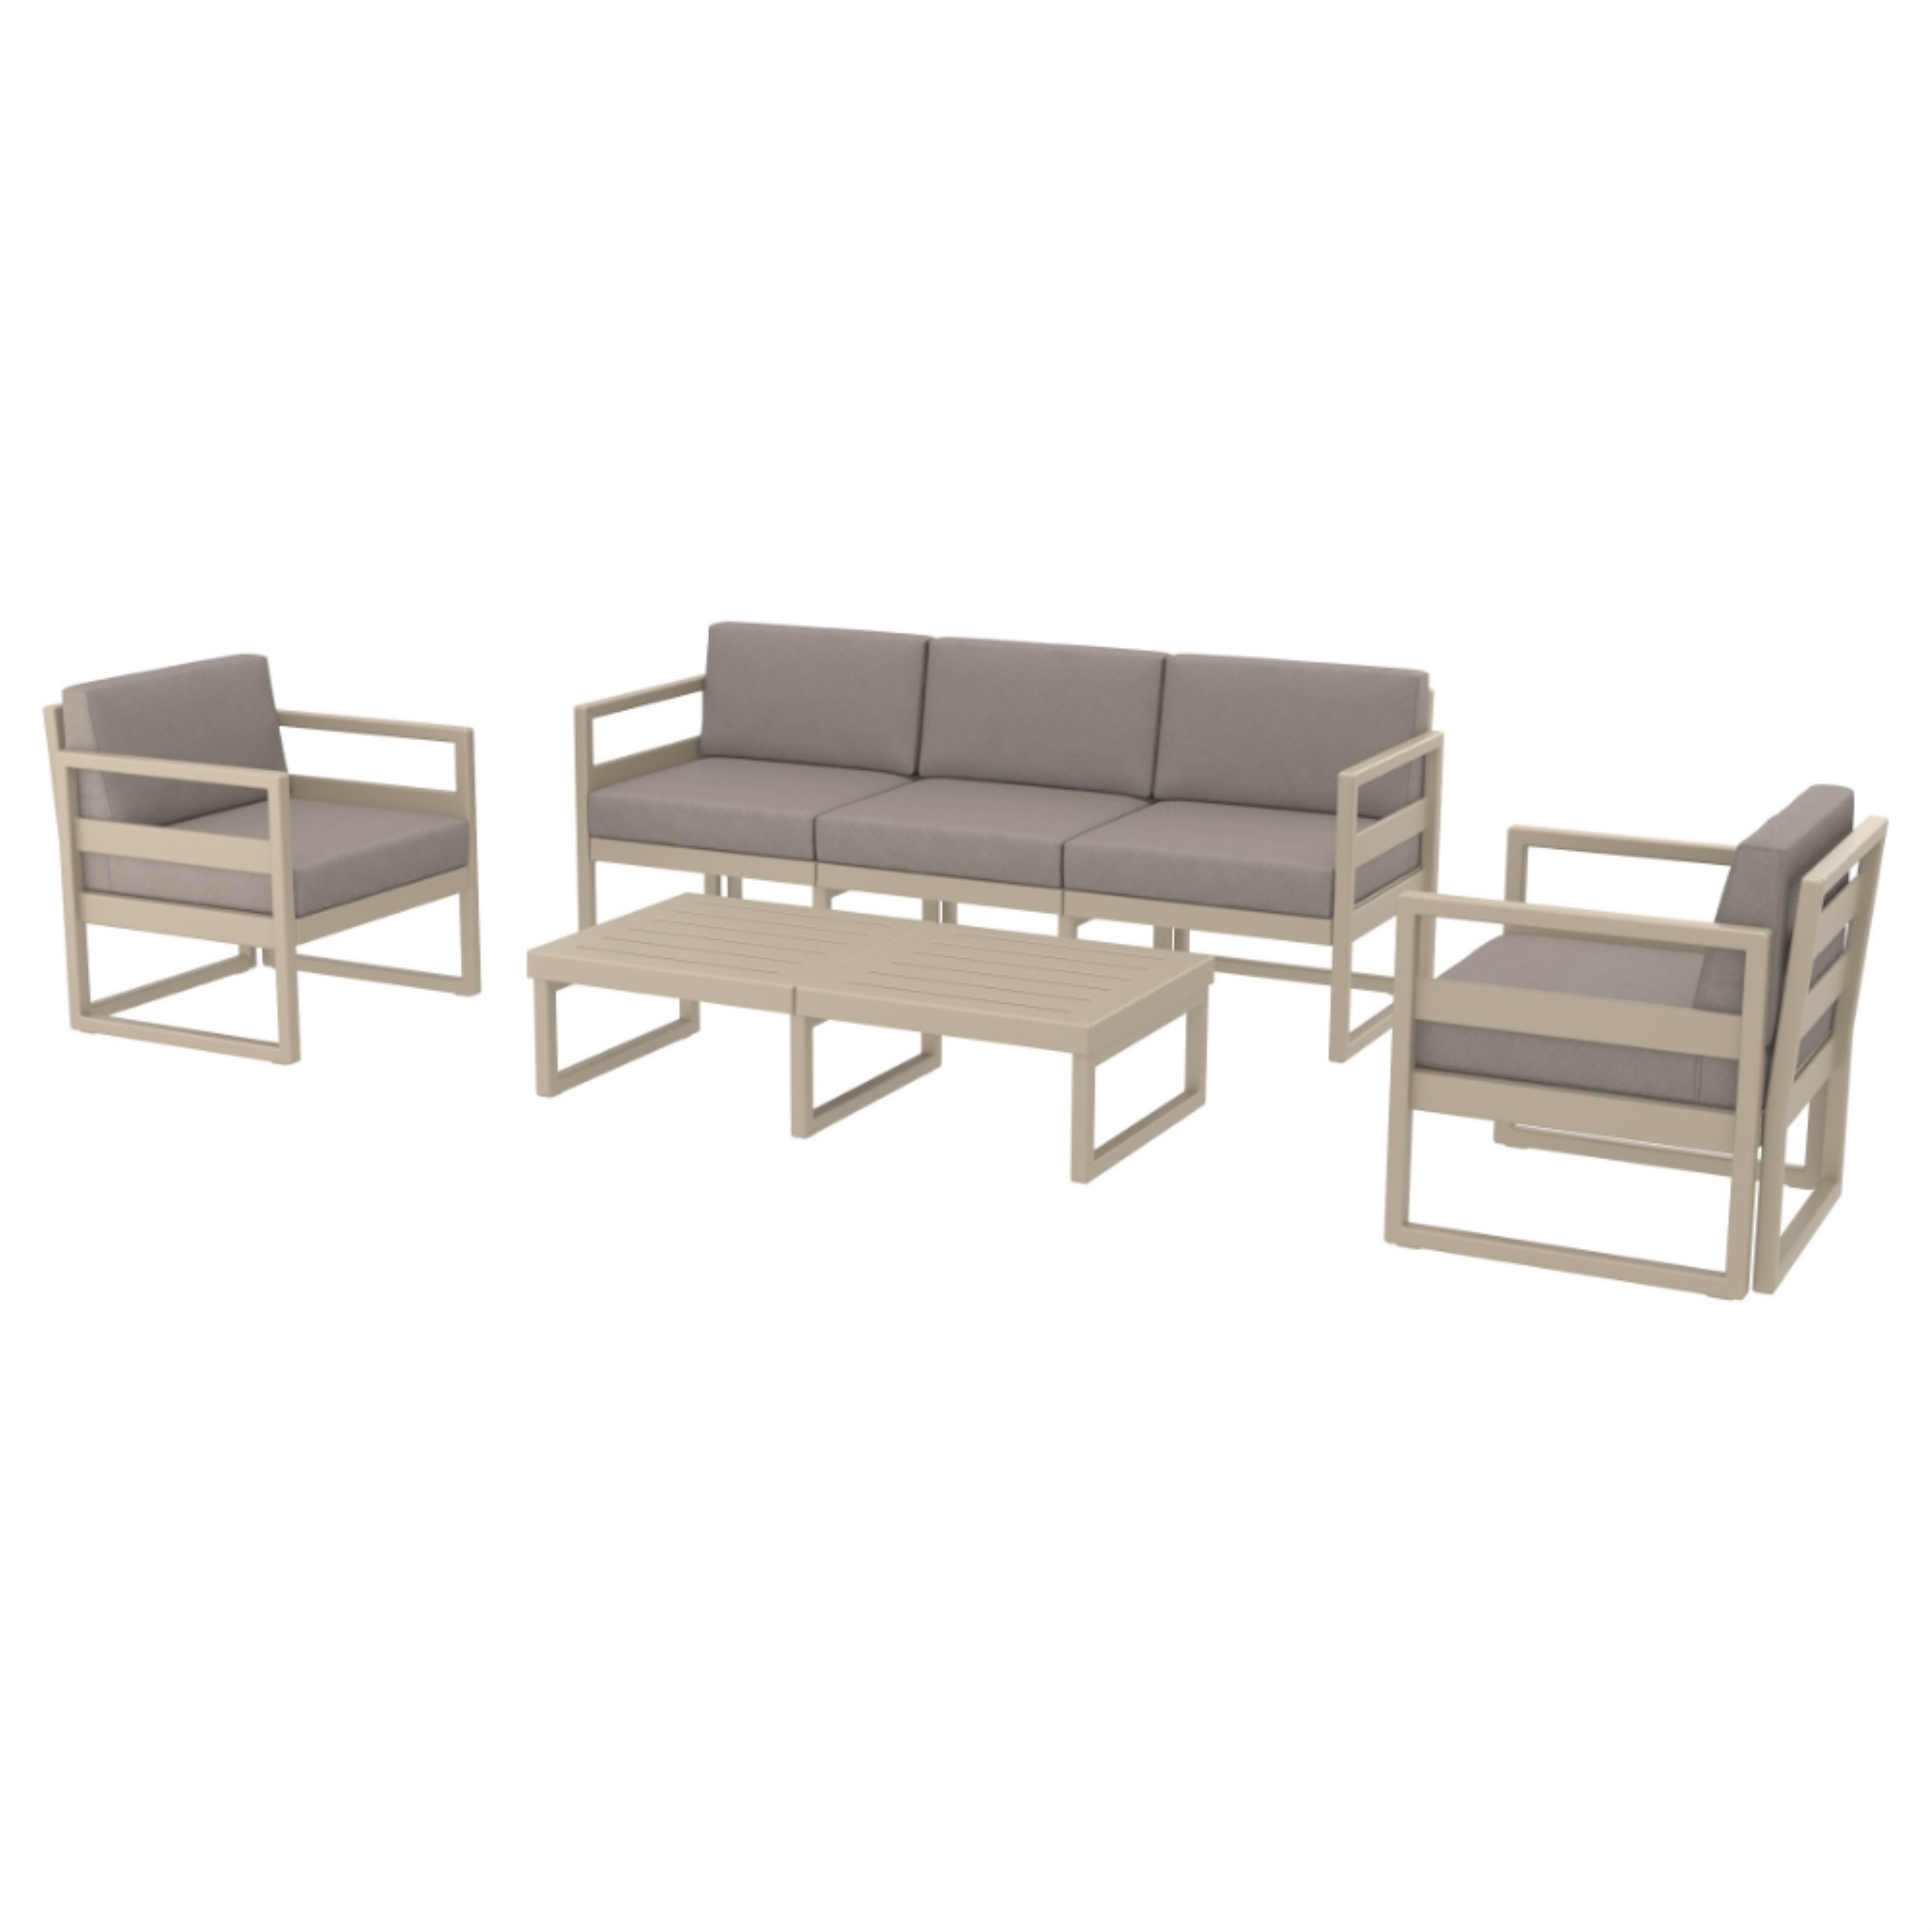 Mykonos 5 Person Lounge Set Taupe with Sunbrella Taupe Cushion - image 1 of 2